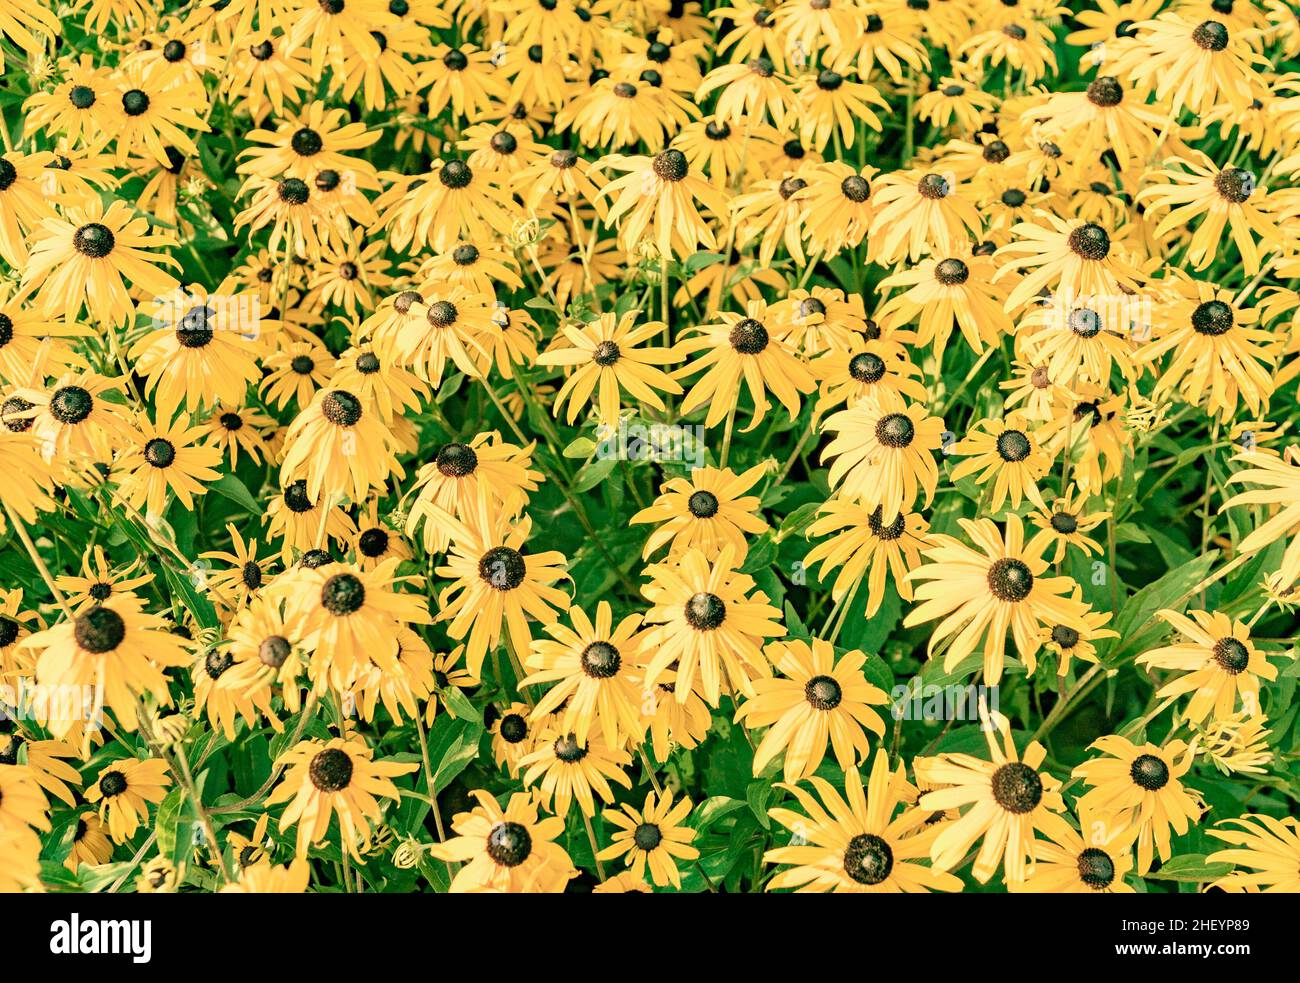 yellow cut leaved coneflower prospers in the flower bed Stock Photo